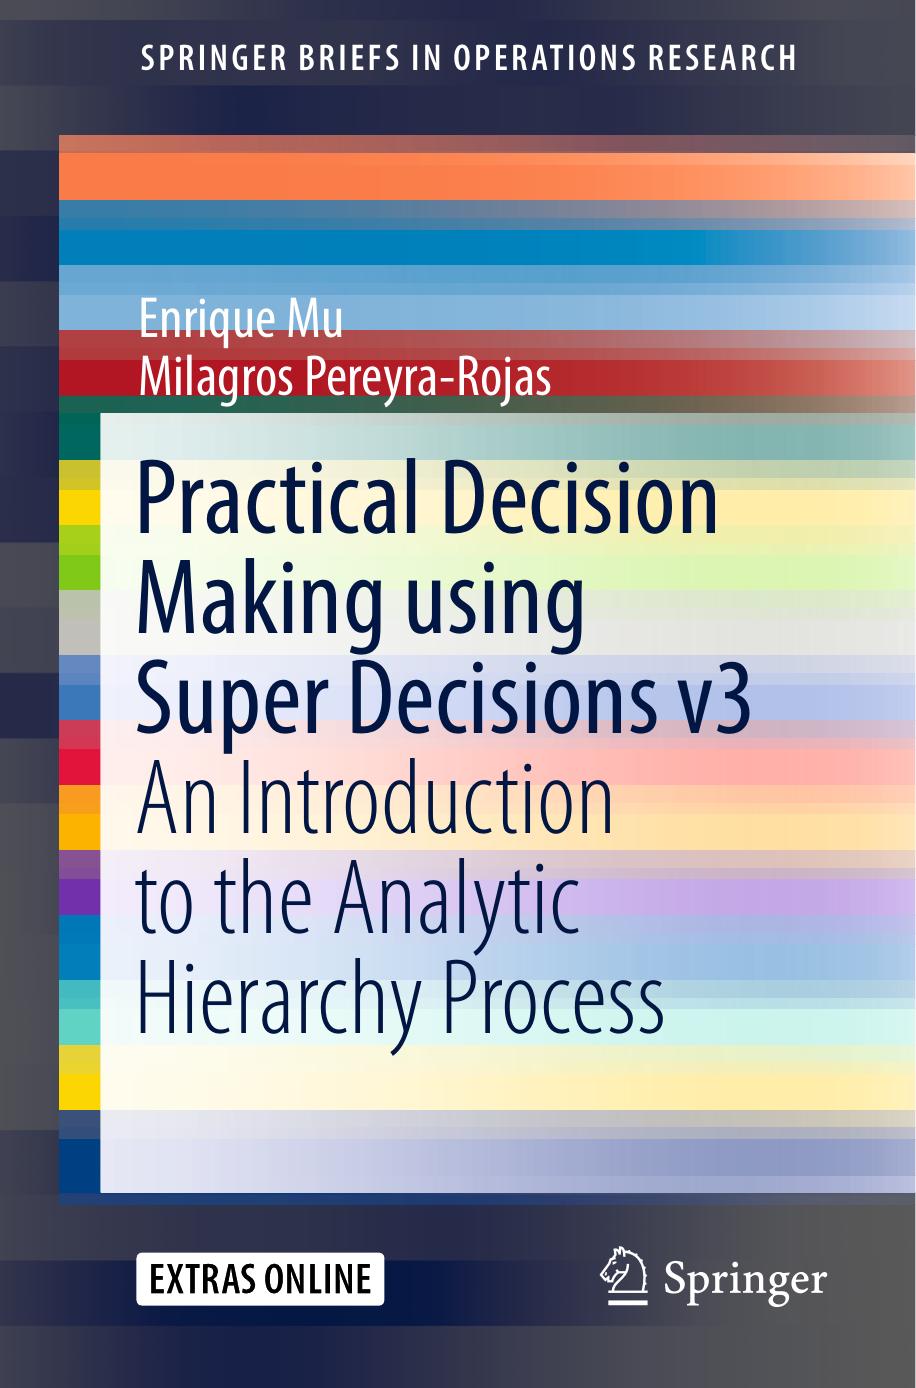 Practical Decision Making using Super Decisions v3 An Introduction to the Analytic Hierarchy Process 2018